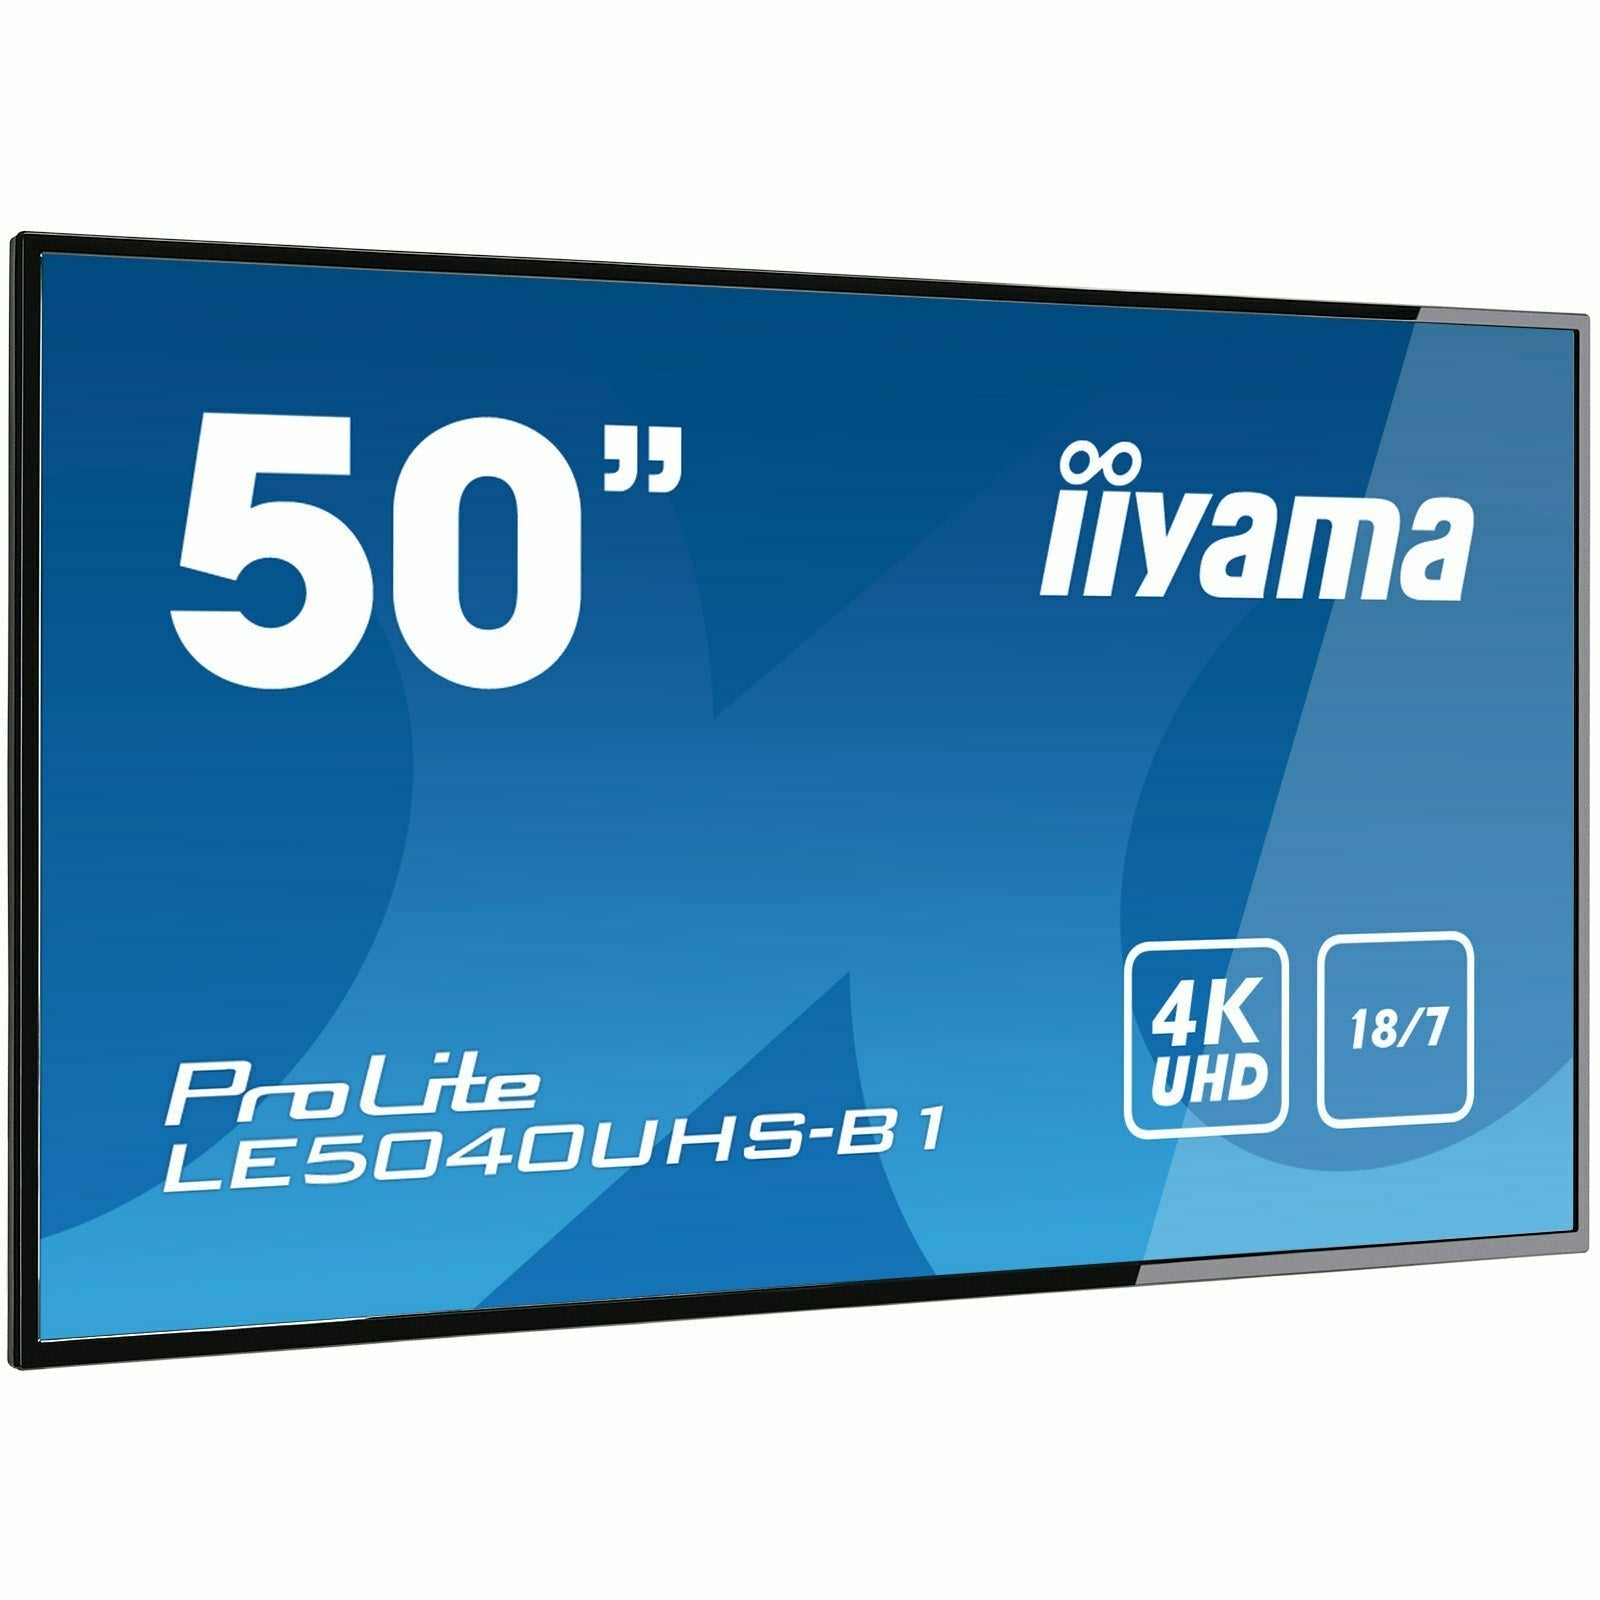 Steel Blue iiyama ProLite LE5040UHS-B1 50" Professional Digital Signage display with a 18/7 operating time and a 4K UHD resolution